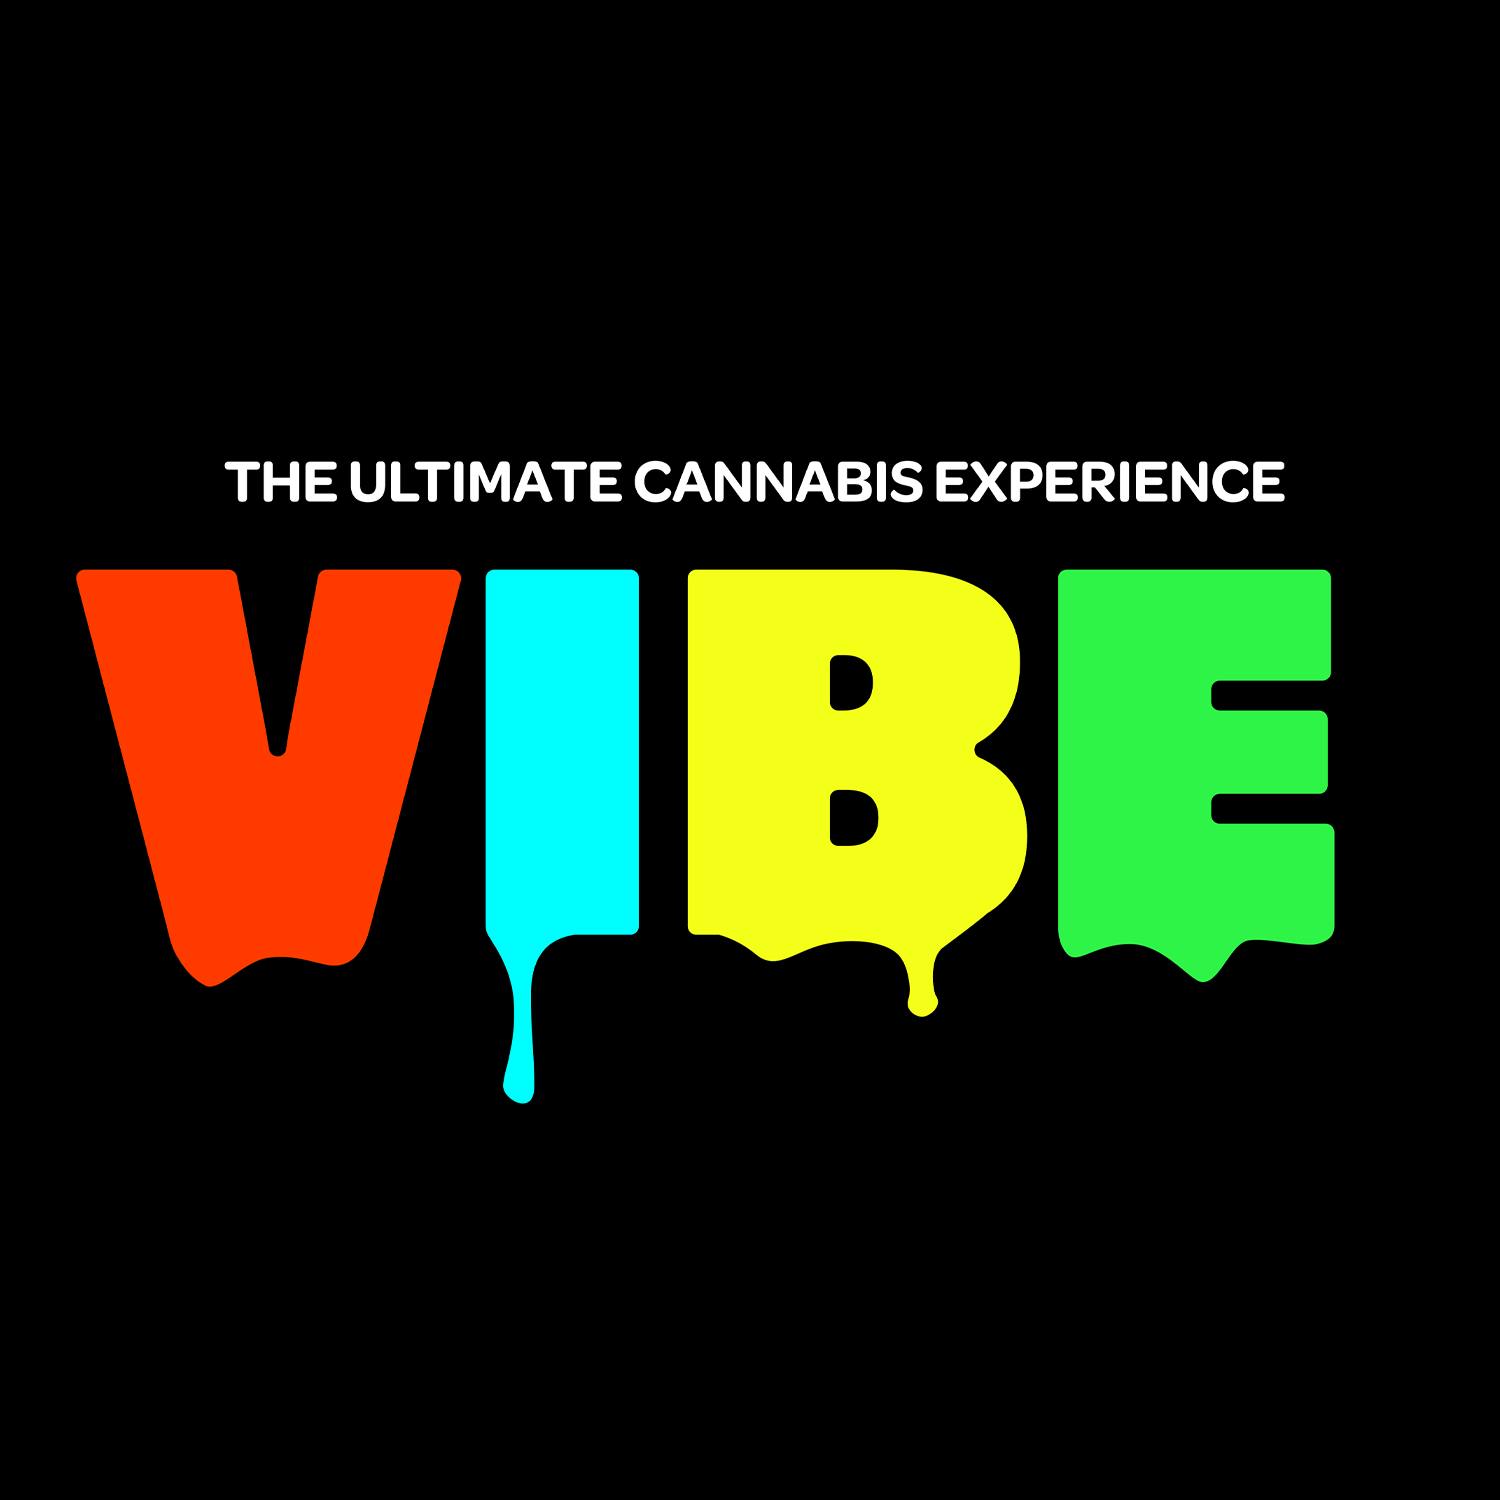 Vibe - The Ultimate Cannabis Experience-logo